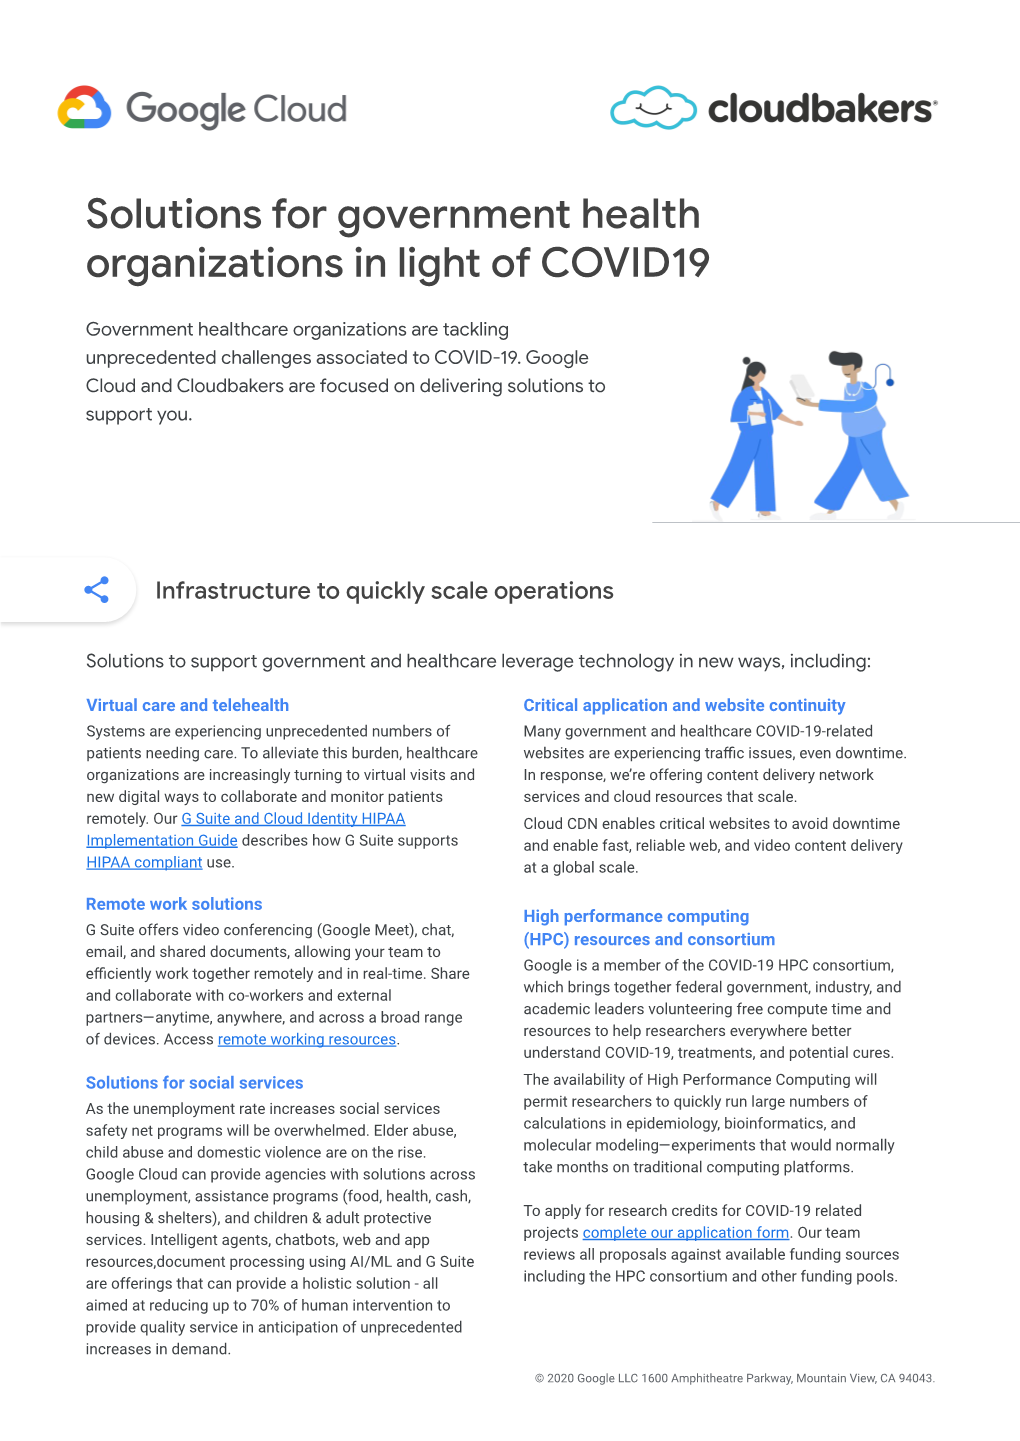 Solutions for Government Health Organizations in Light of COVID19